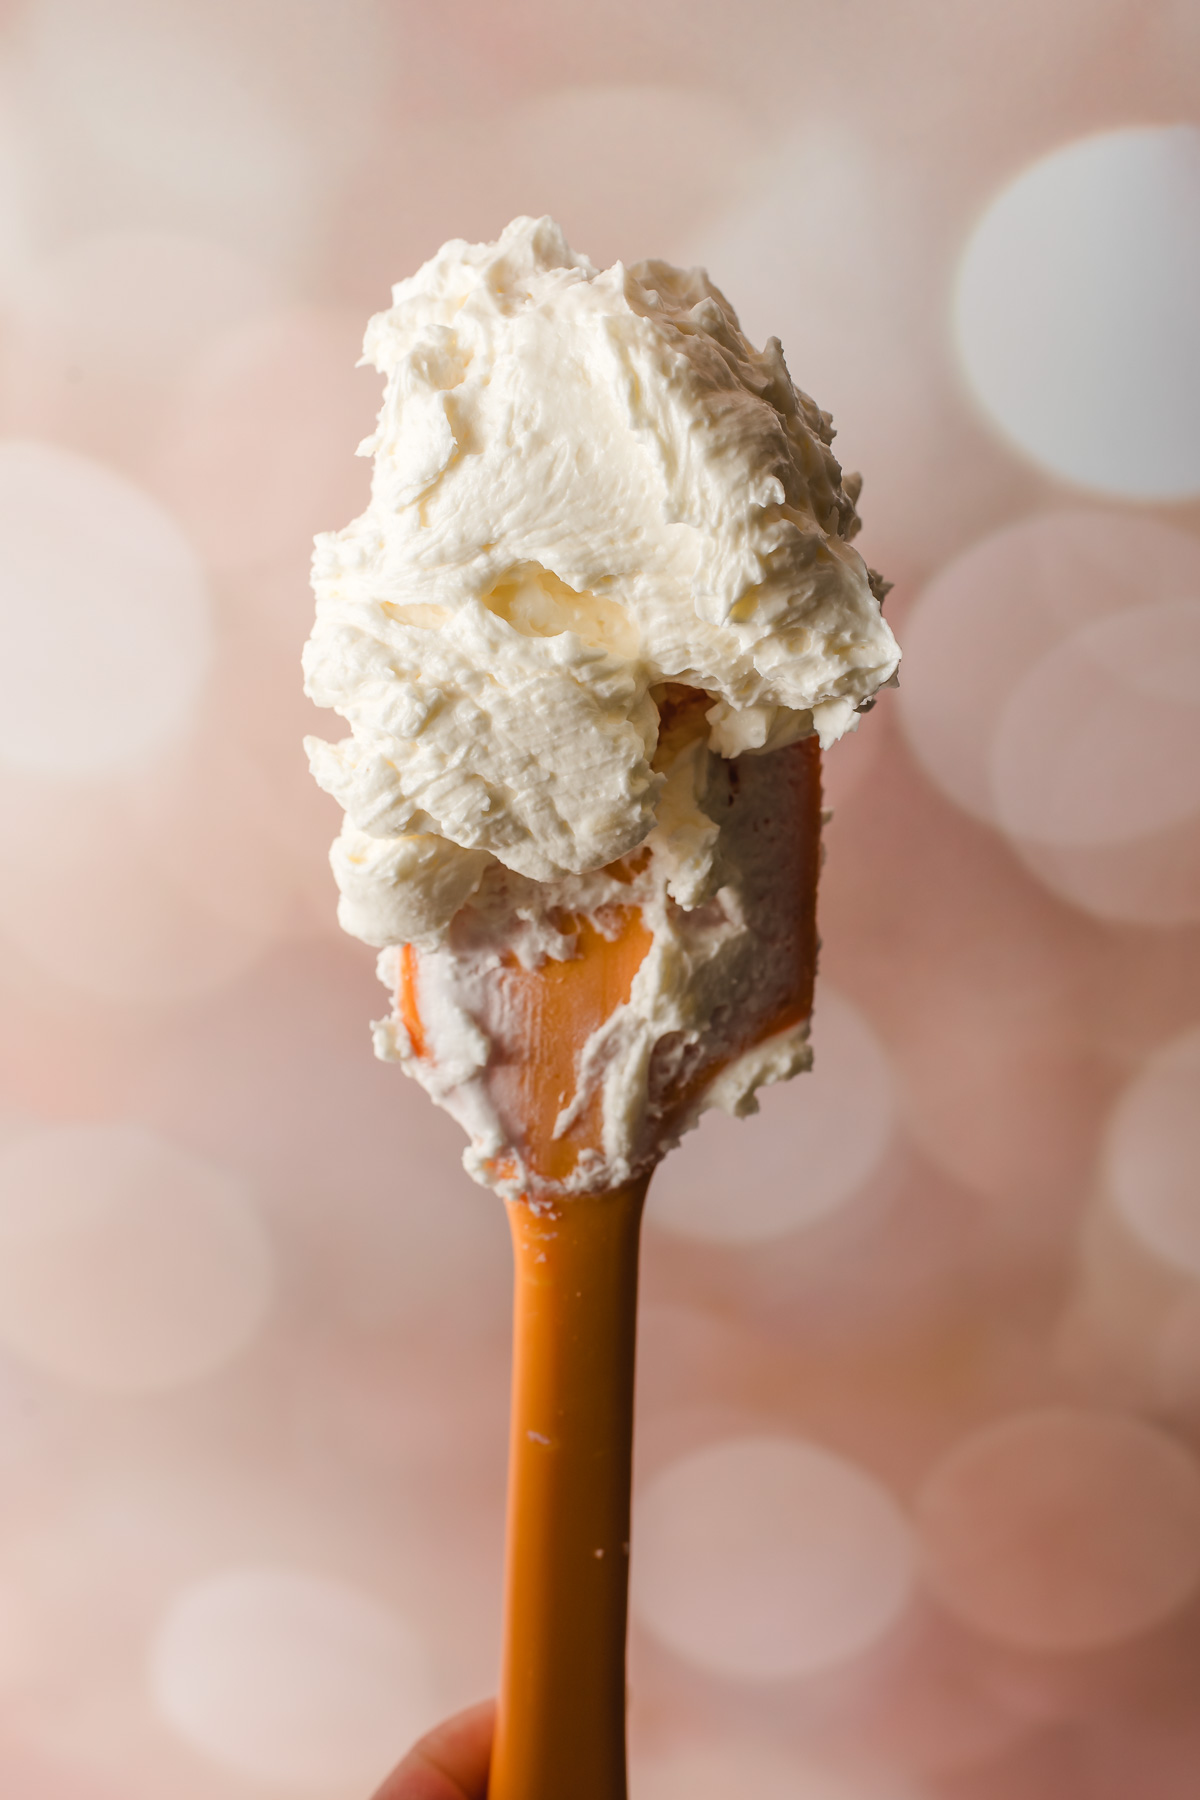 Spatula with swiss meringue frosting.